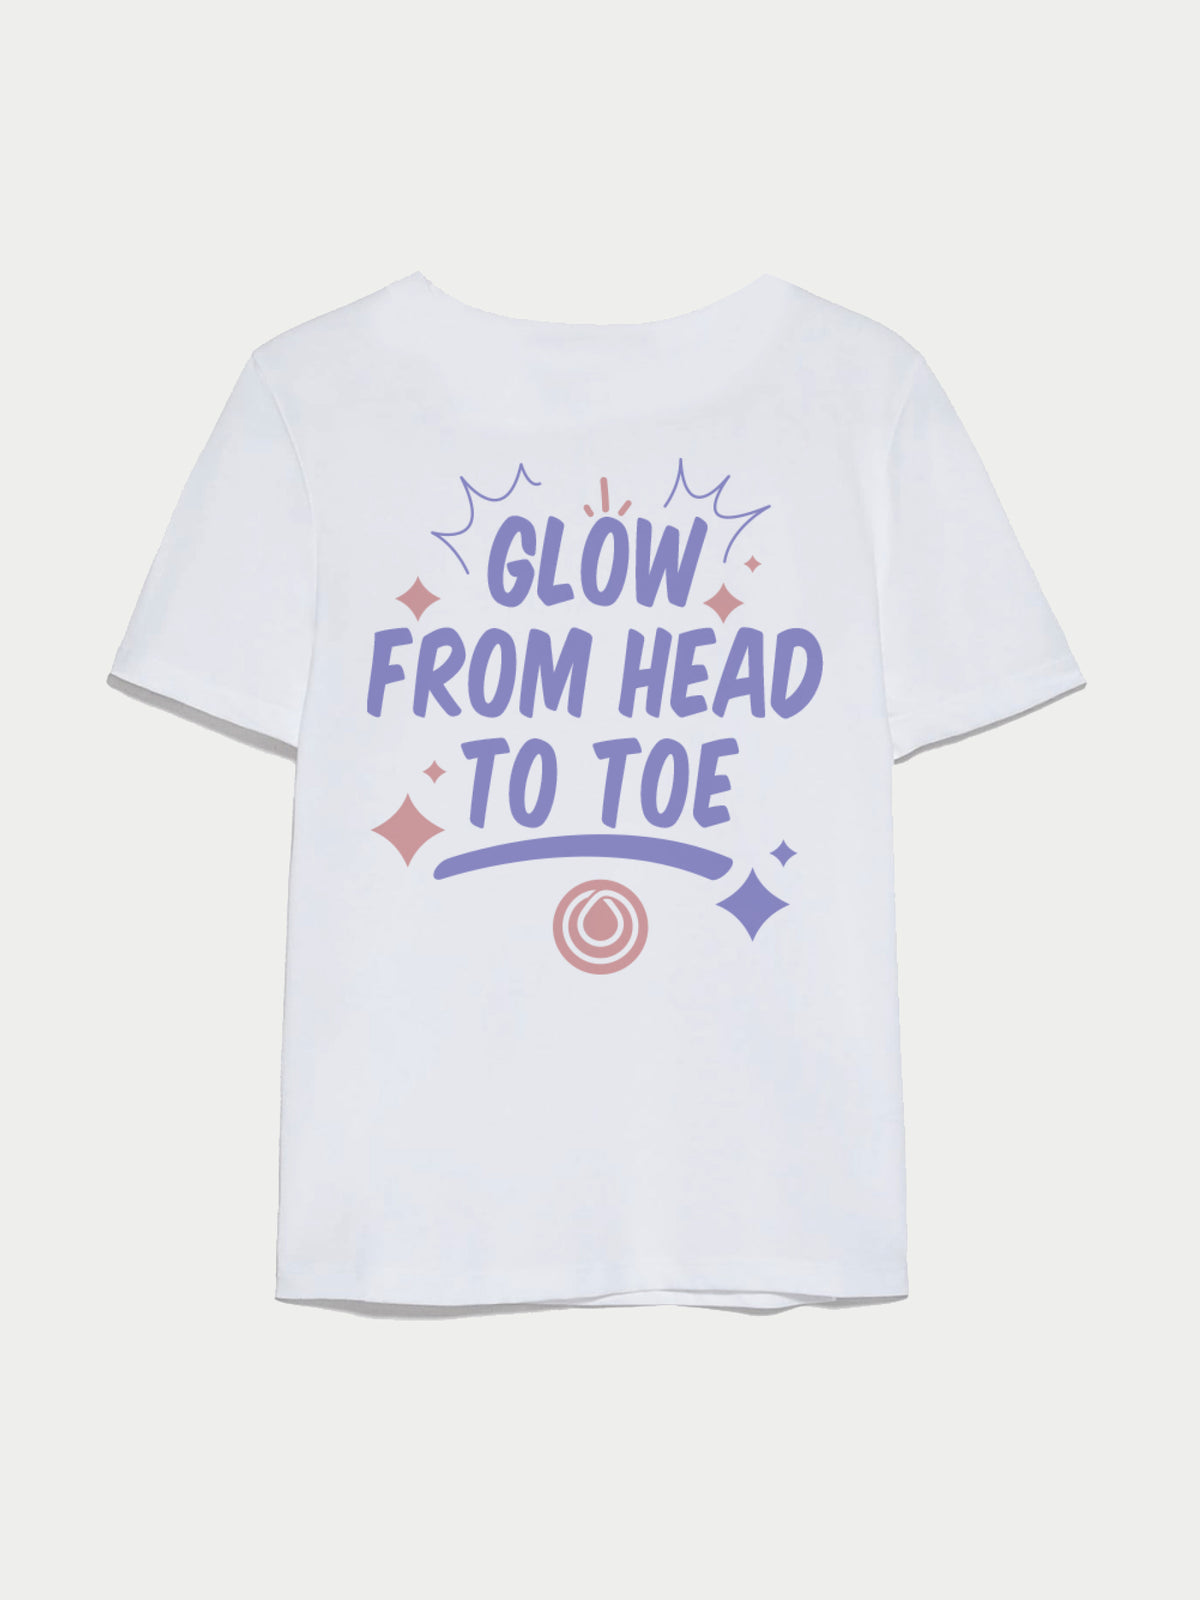 GLOW FROM HEAD TO TOE SHIRT